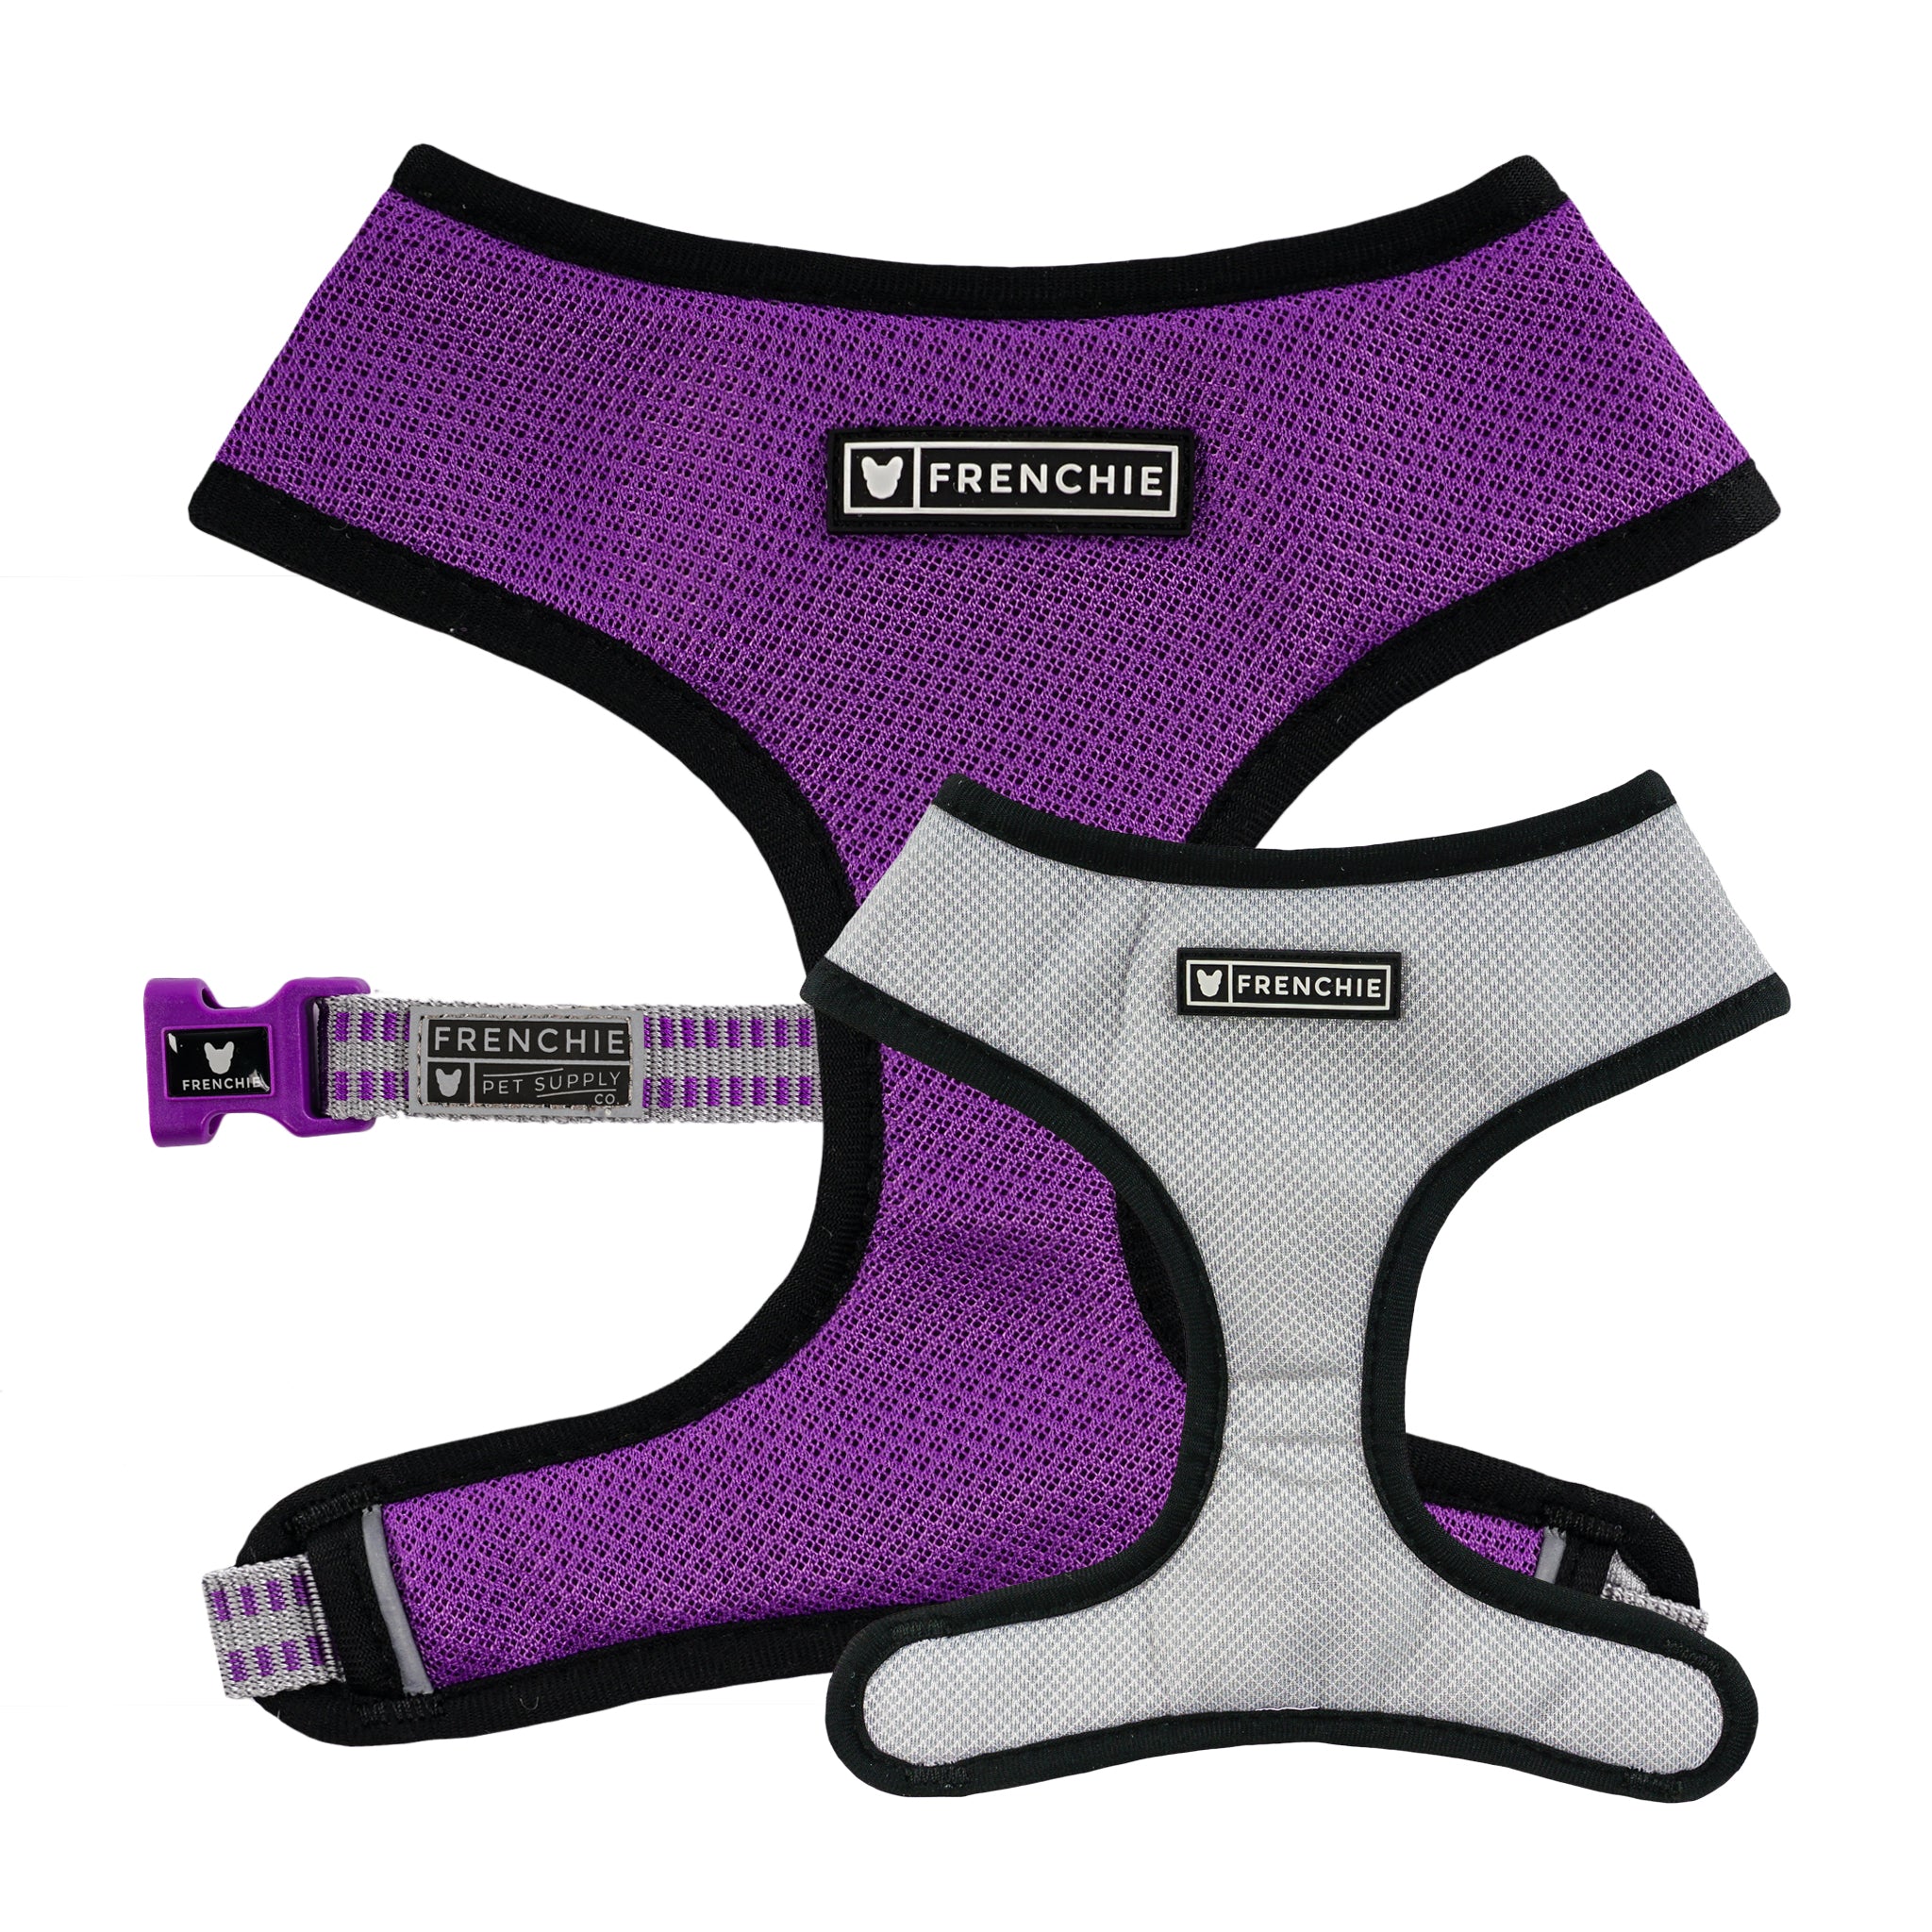 Frenchie Duo Reversible Harness - Purple and Silver - Frenchie Bulldog - Shop Harnesses for French Bulldogs - Shop French Bulldog Harness - Harnesses for Pugs